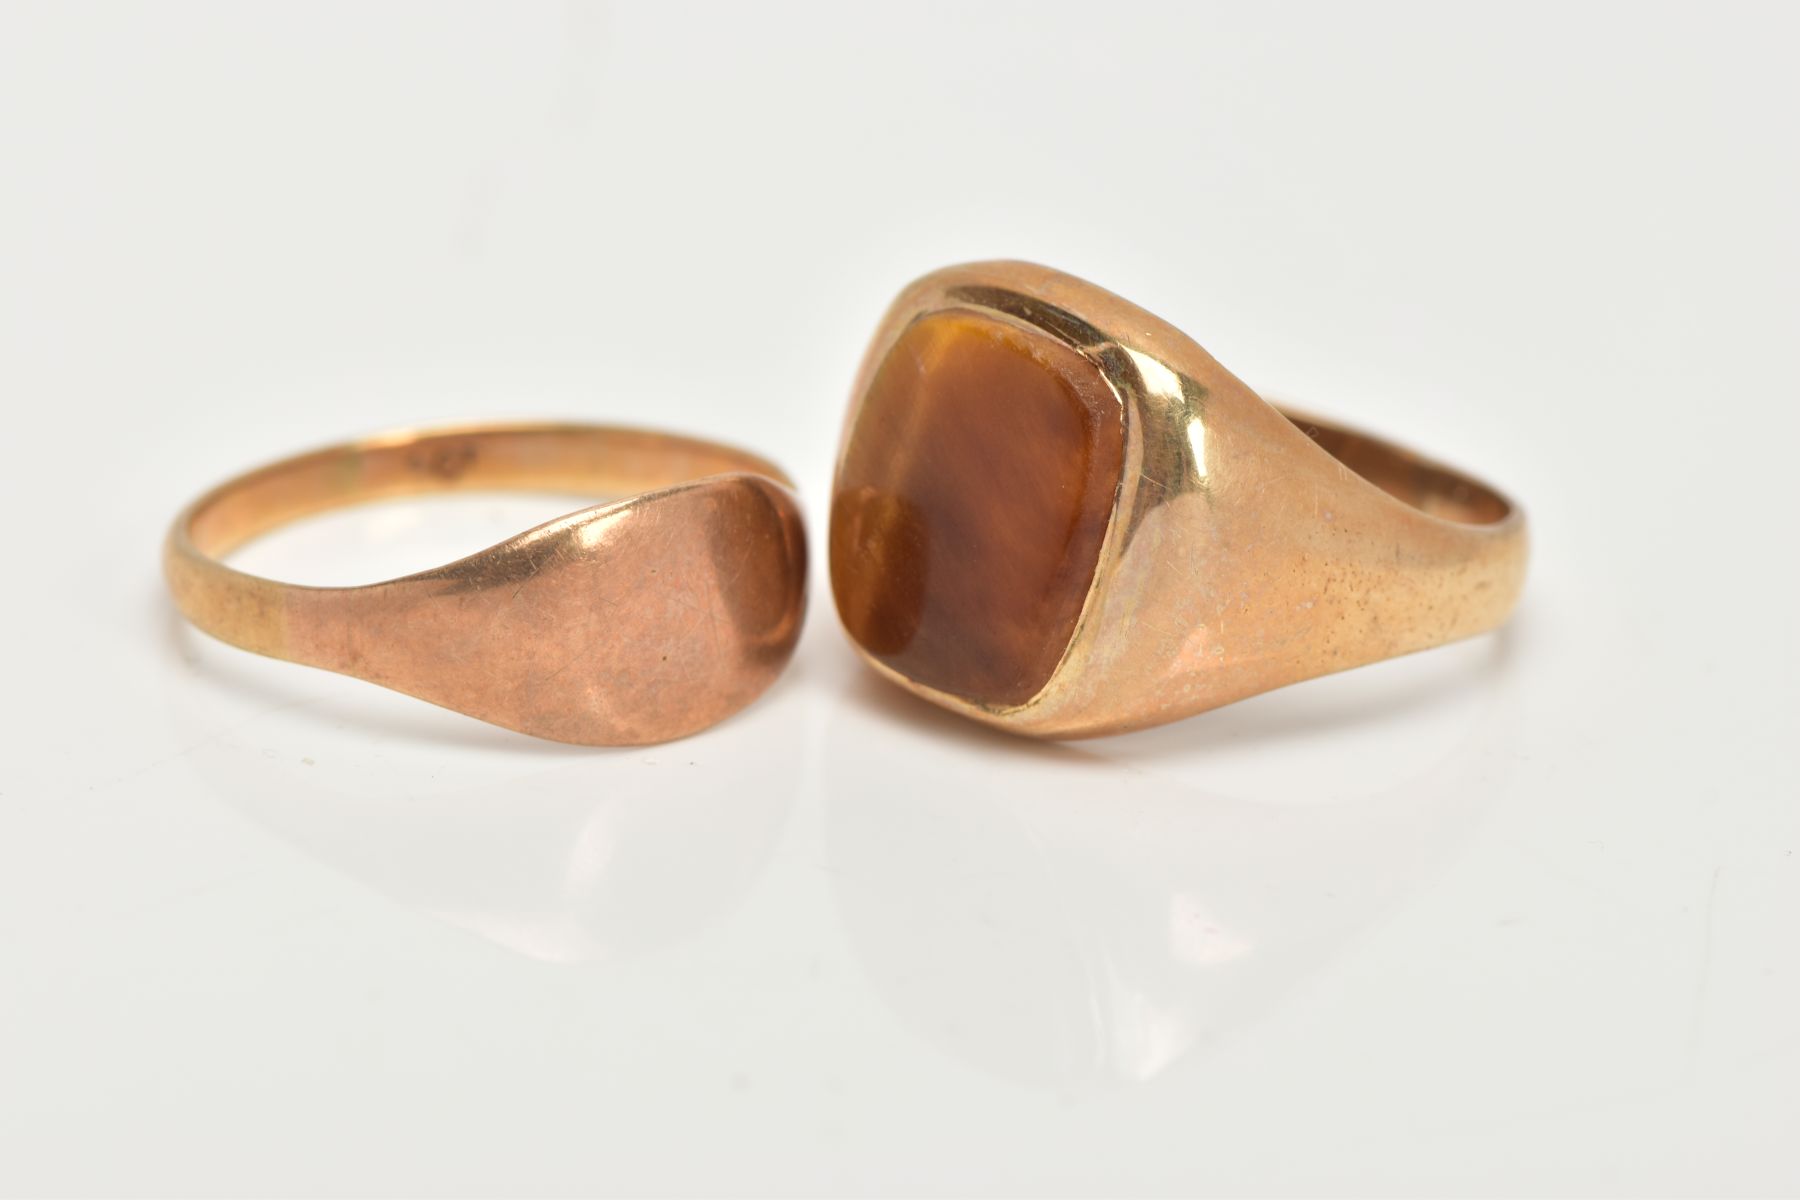 A 9CT GOLD TIGERS EYE SIGNET AND YELLOW METAL SIGNET, a large signet ring set with a squared - Image 2 of 3